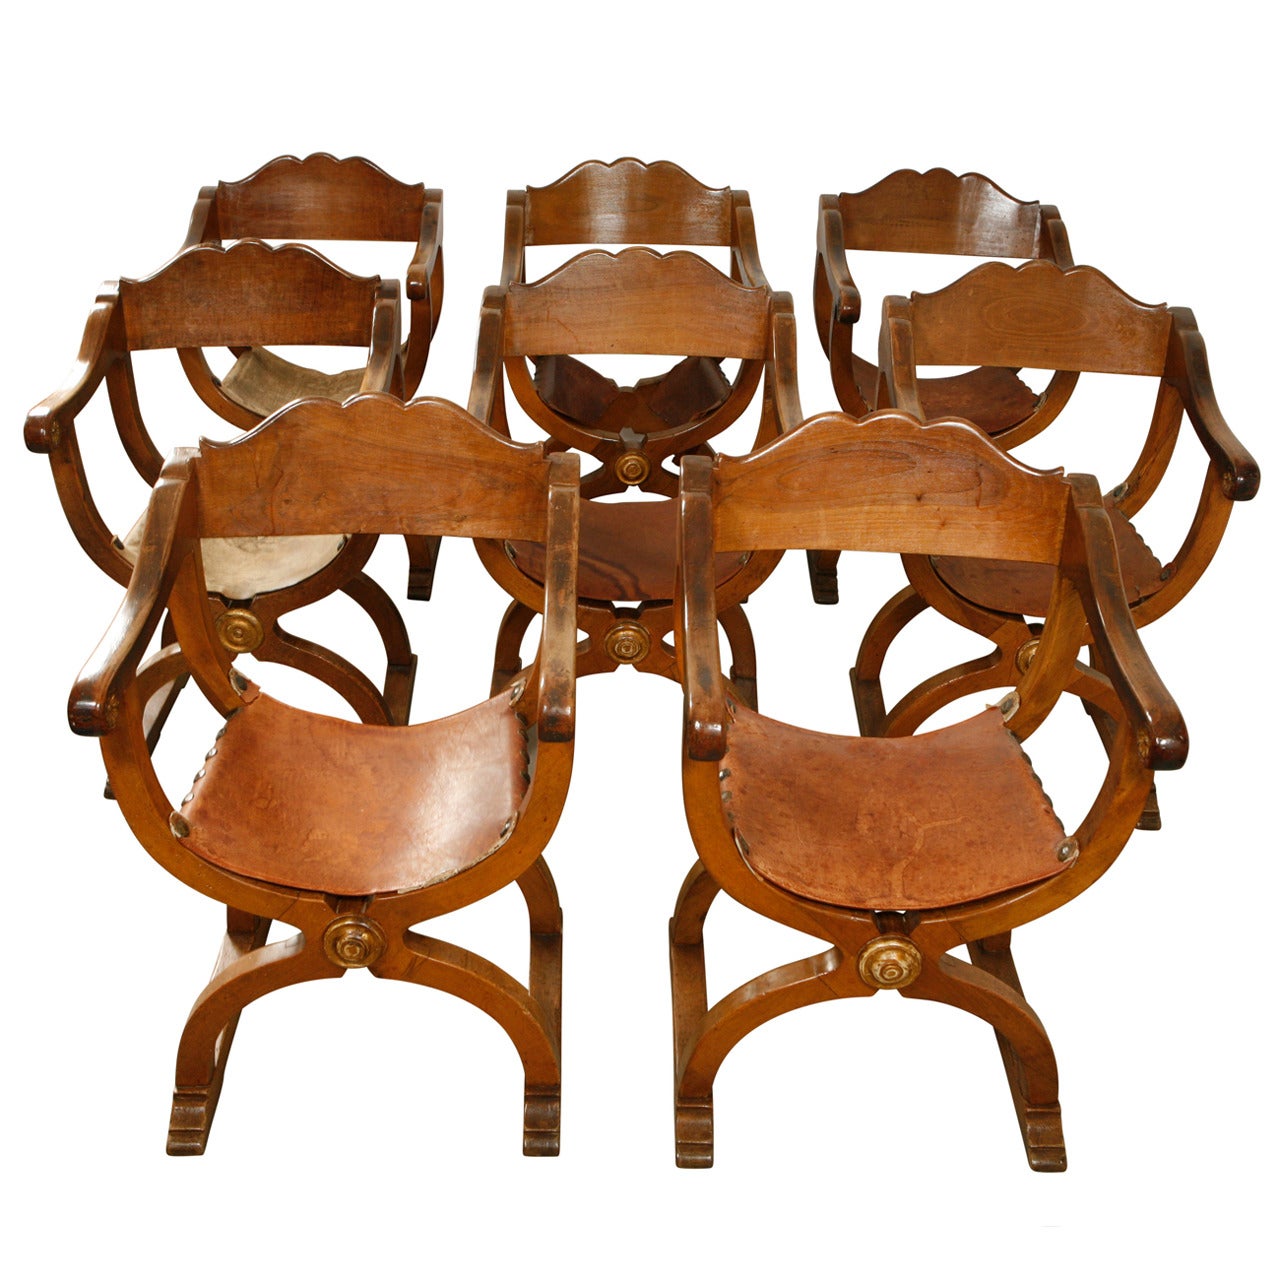 Set of 8 Walnut Florentine Dining Chairs, 19th Century Italian For Sale